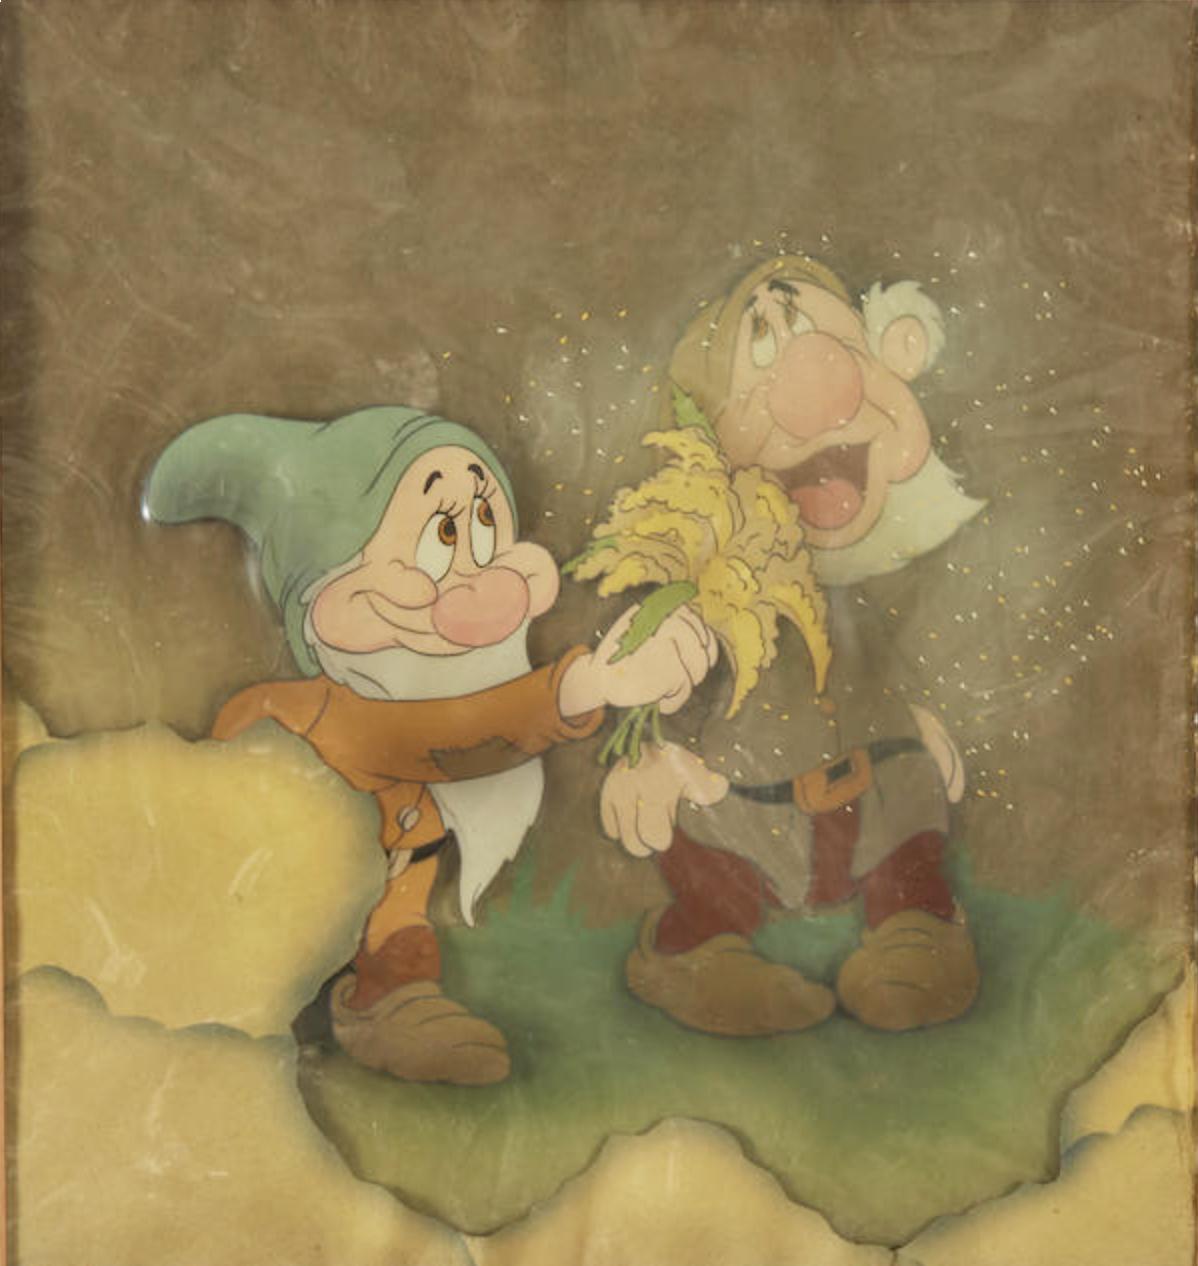 Original Walt Disney Production Cels on Courvoisier Background from Snow White and the Seven Dwarfs
Studio: Walt Disney
Medium: Production cels on Courvoisier background
Film: Snow White and the Seven Dwarfs
Year: 1937
Characters: Sneezy and